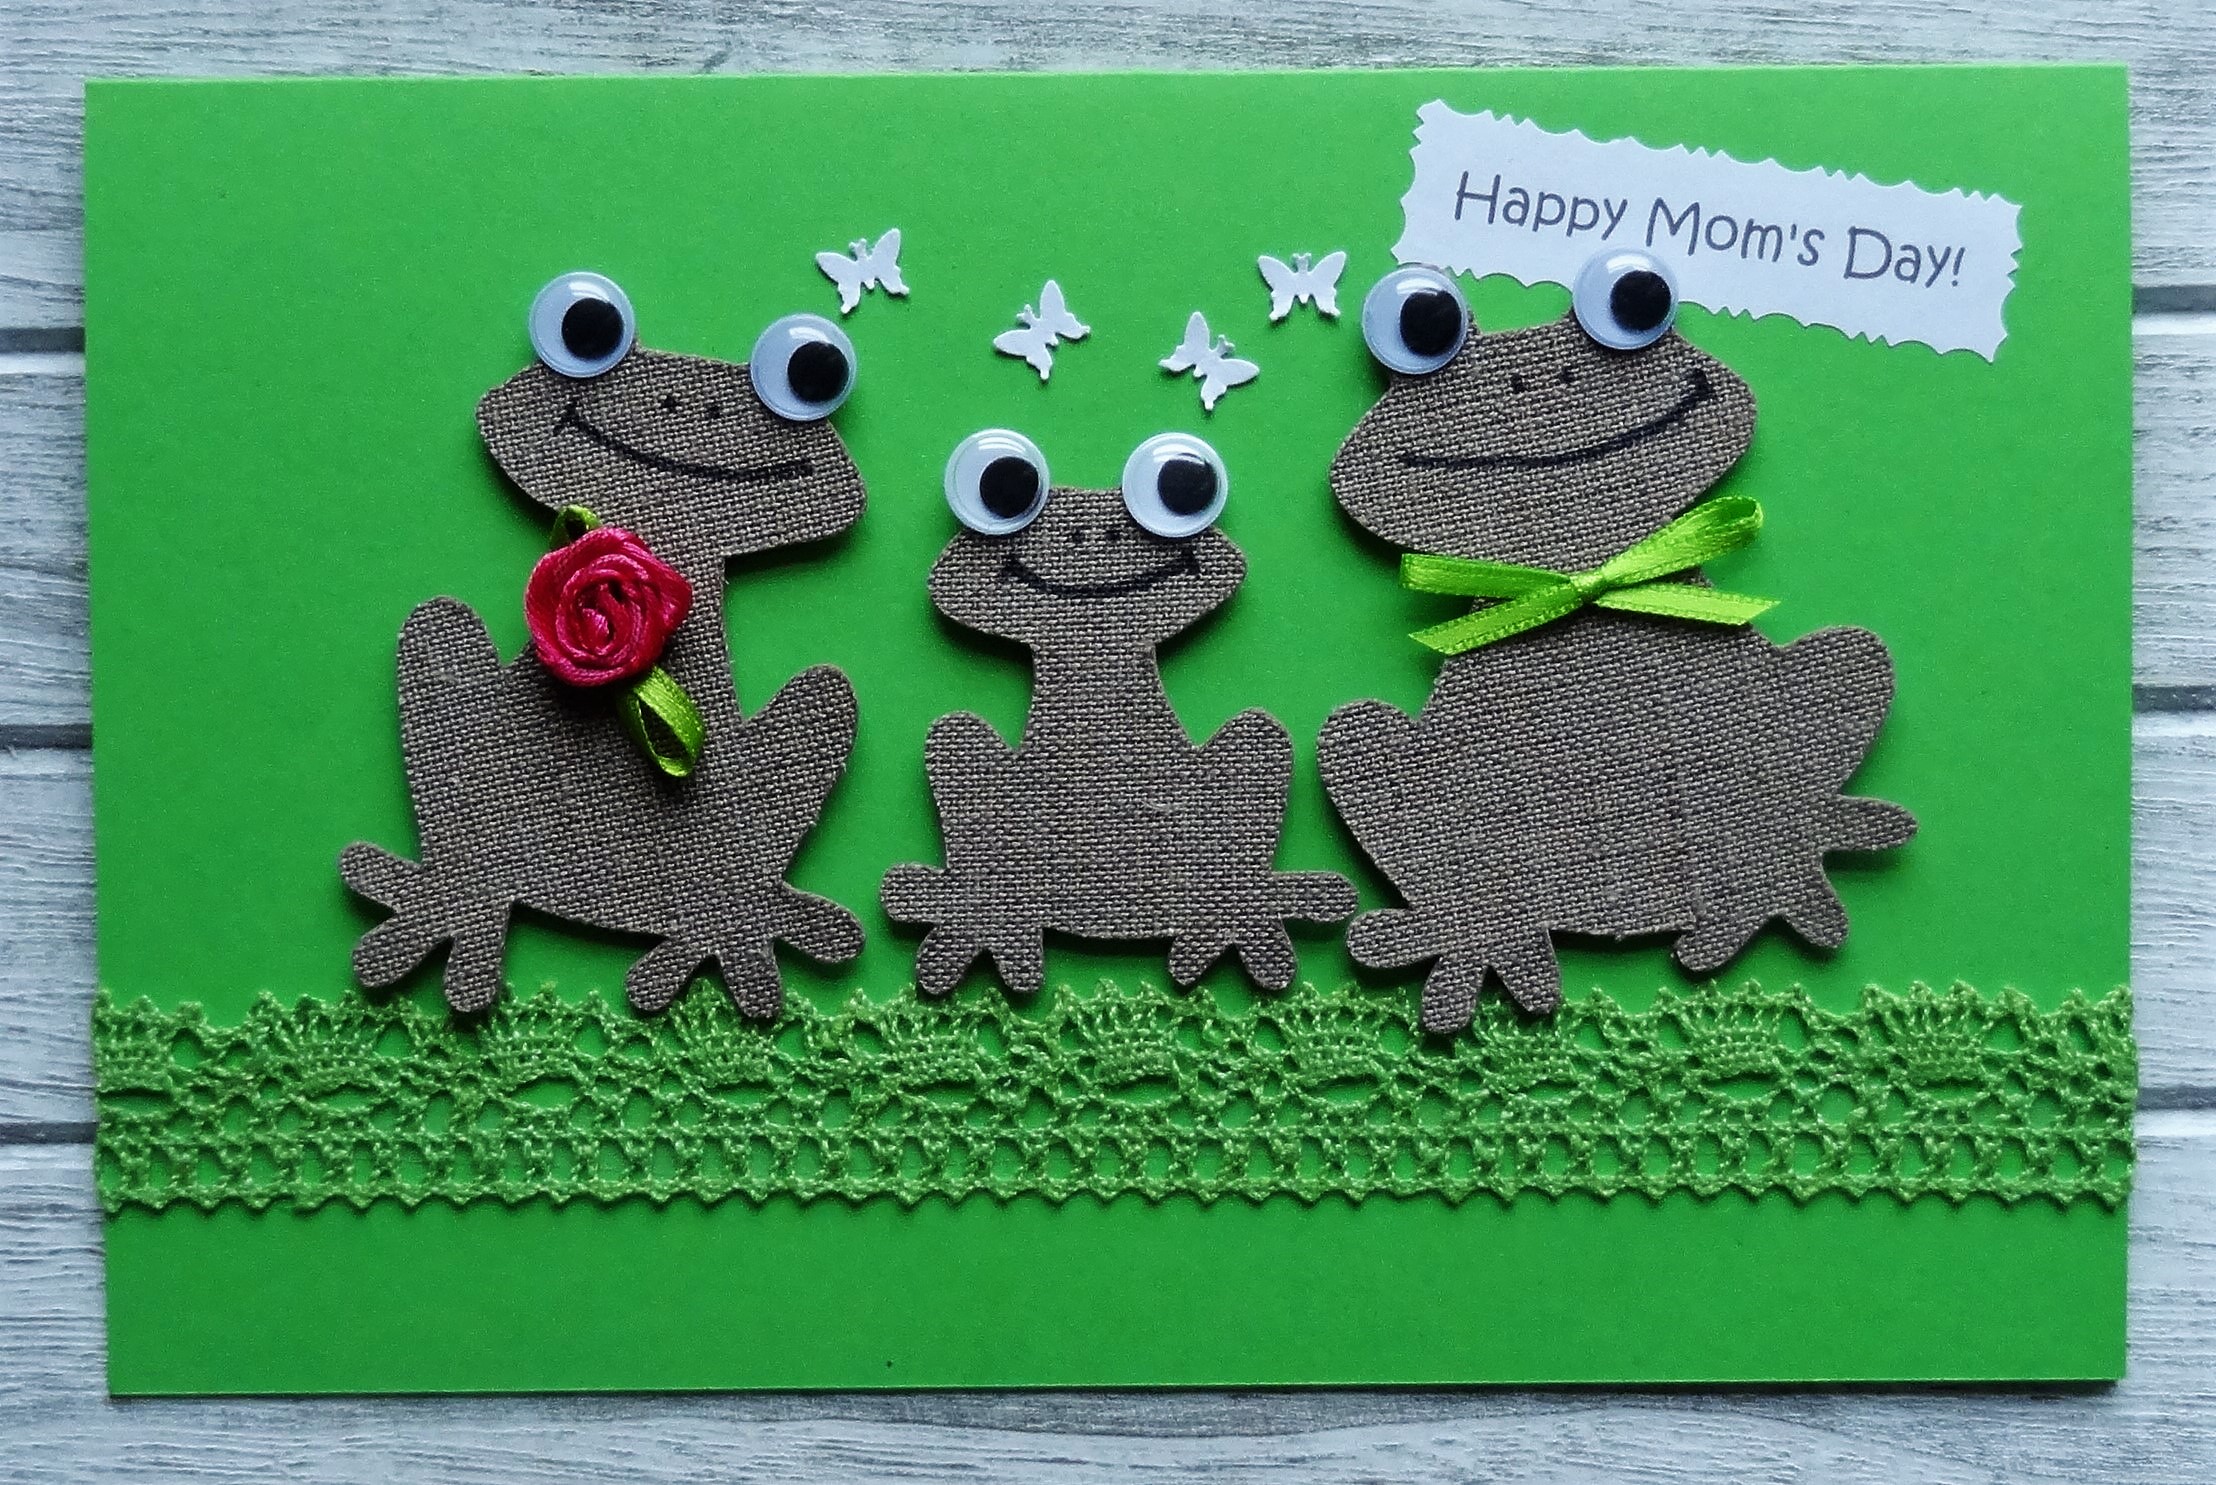 3D frogs. Happy Mom's day!